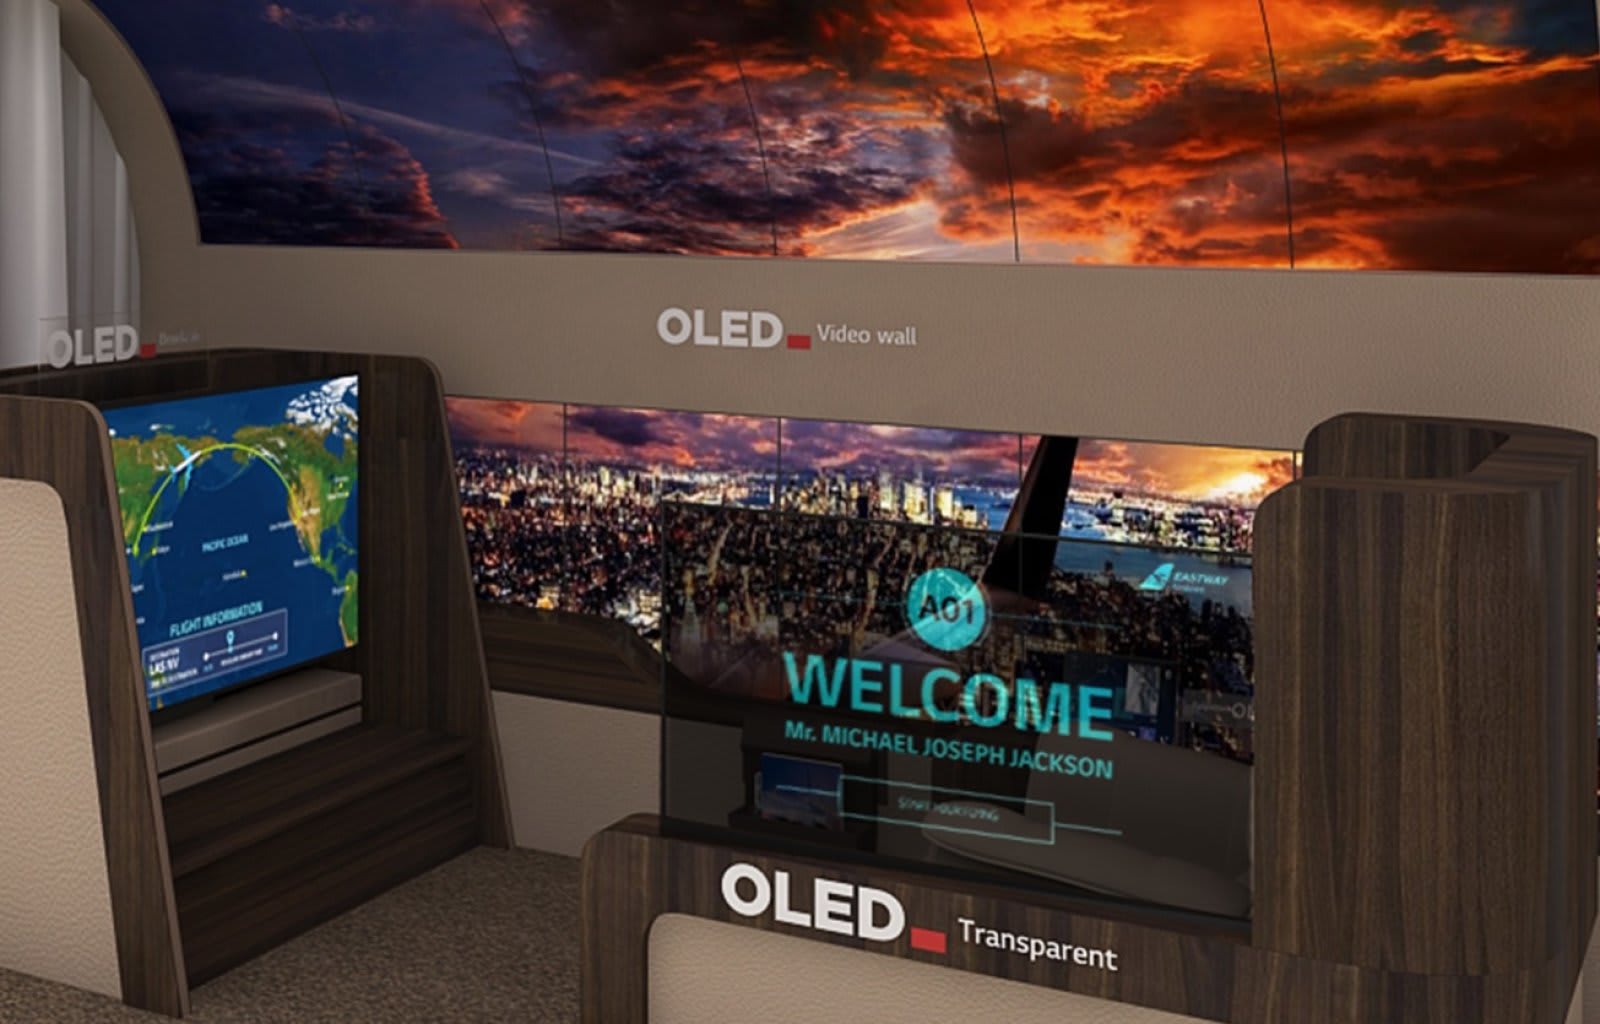 Lg S New Rollable Oled Tv Concept Unfurls From The Ceiling Engadget